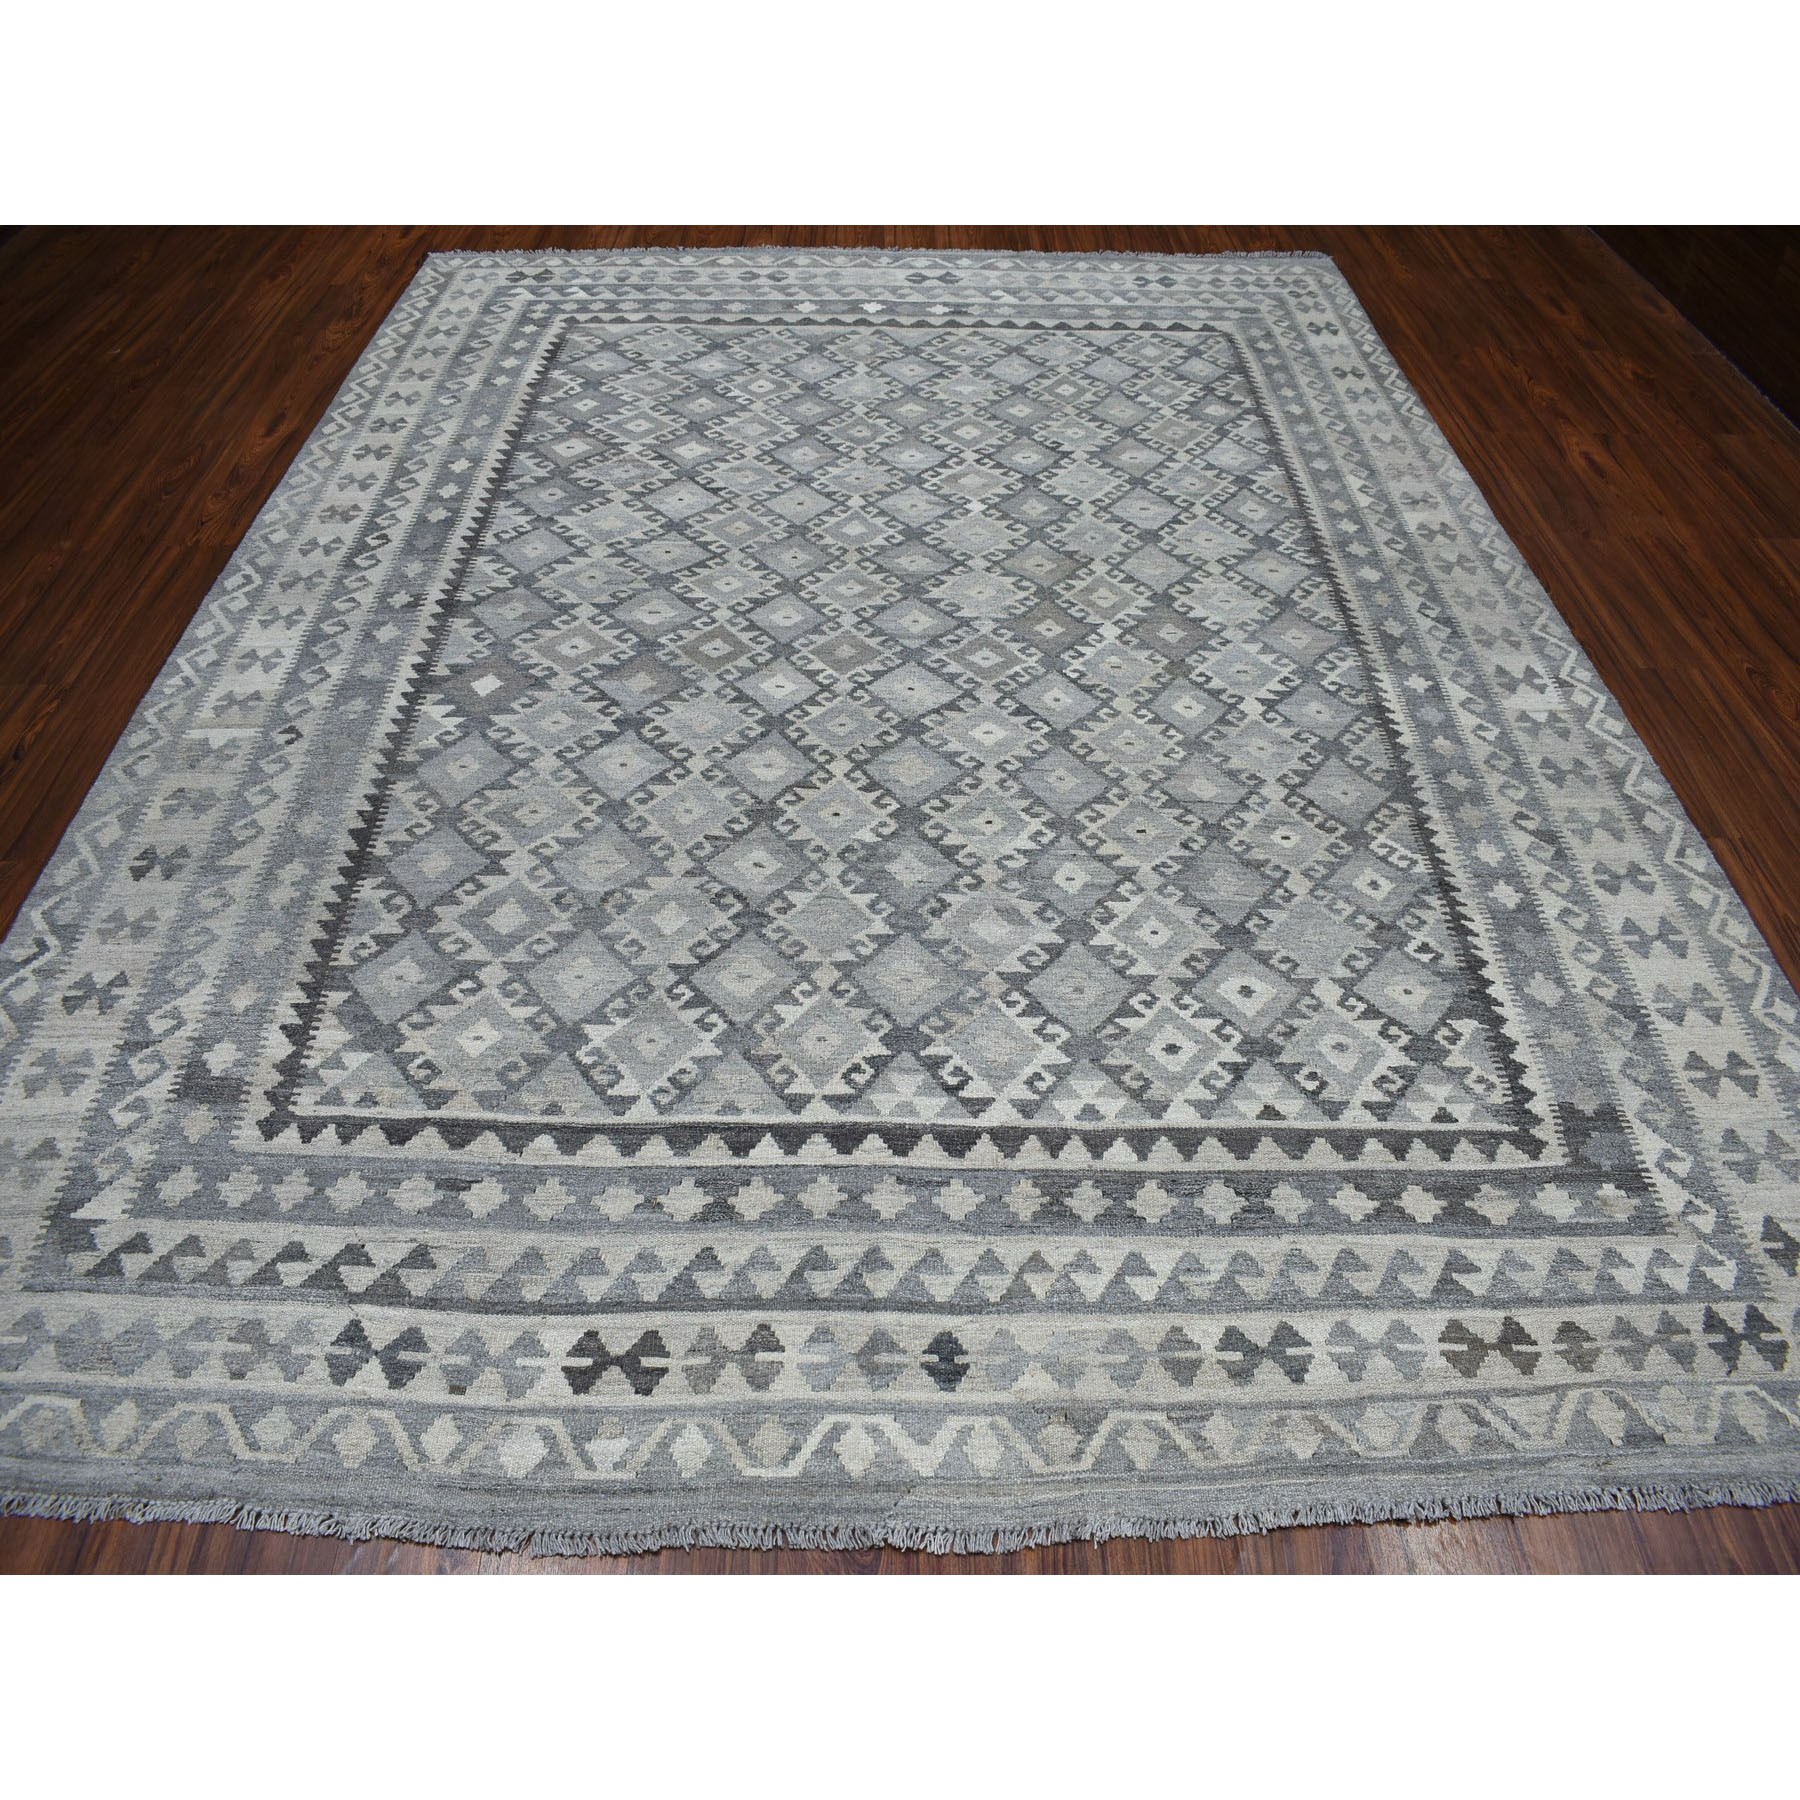 8-8 x11-3  Undyed Natural Wool Afghan Kilim Reversible Hand Woven Oriental Rug 